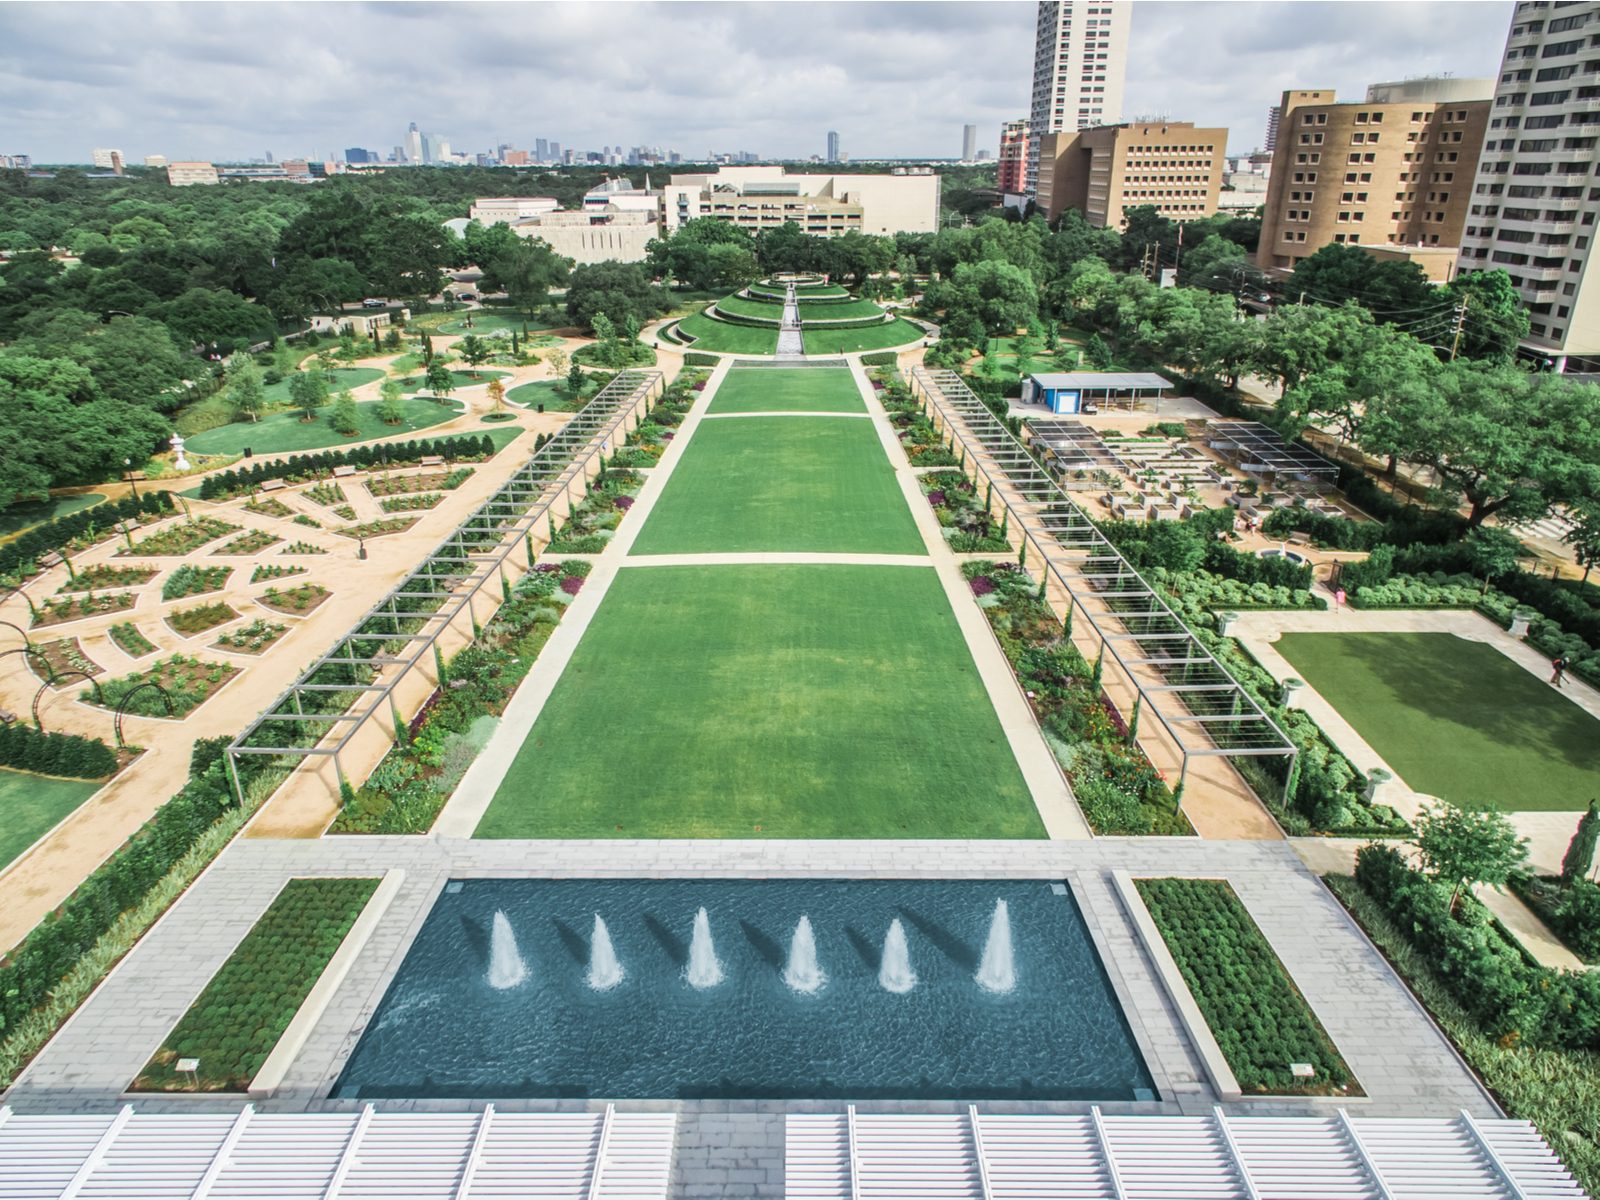 McGovern Centennial Gardens at Hermann Park, one of the best things to do in Houston